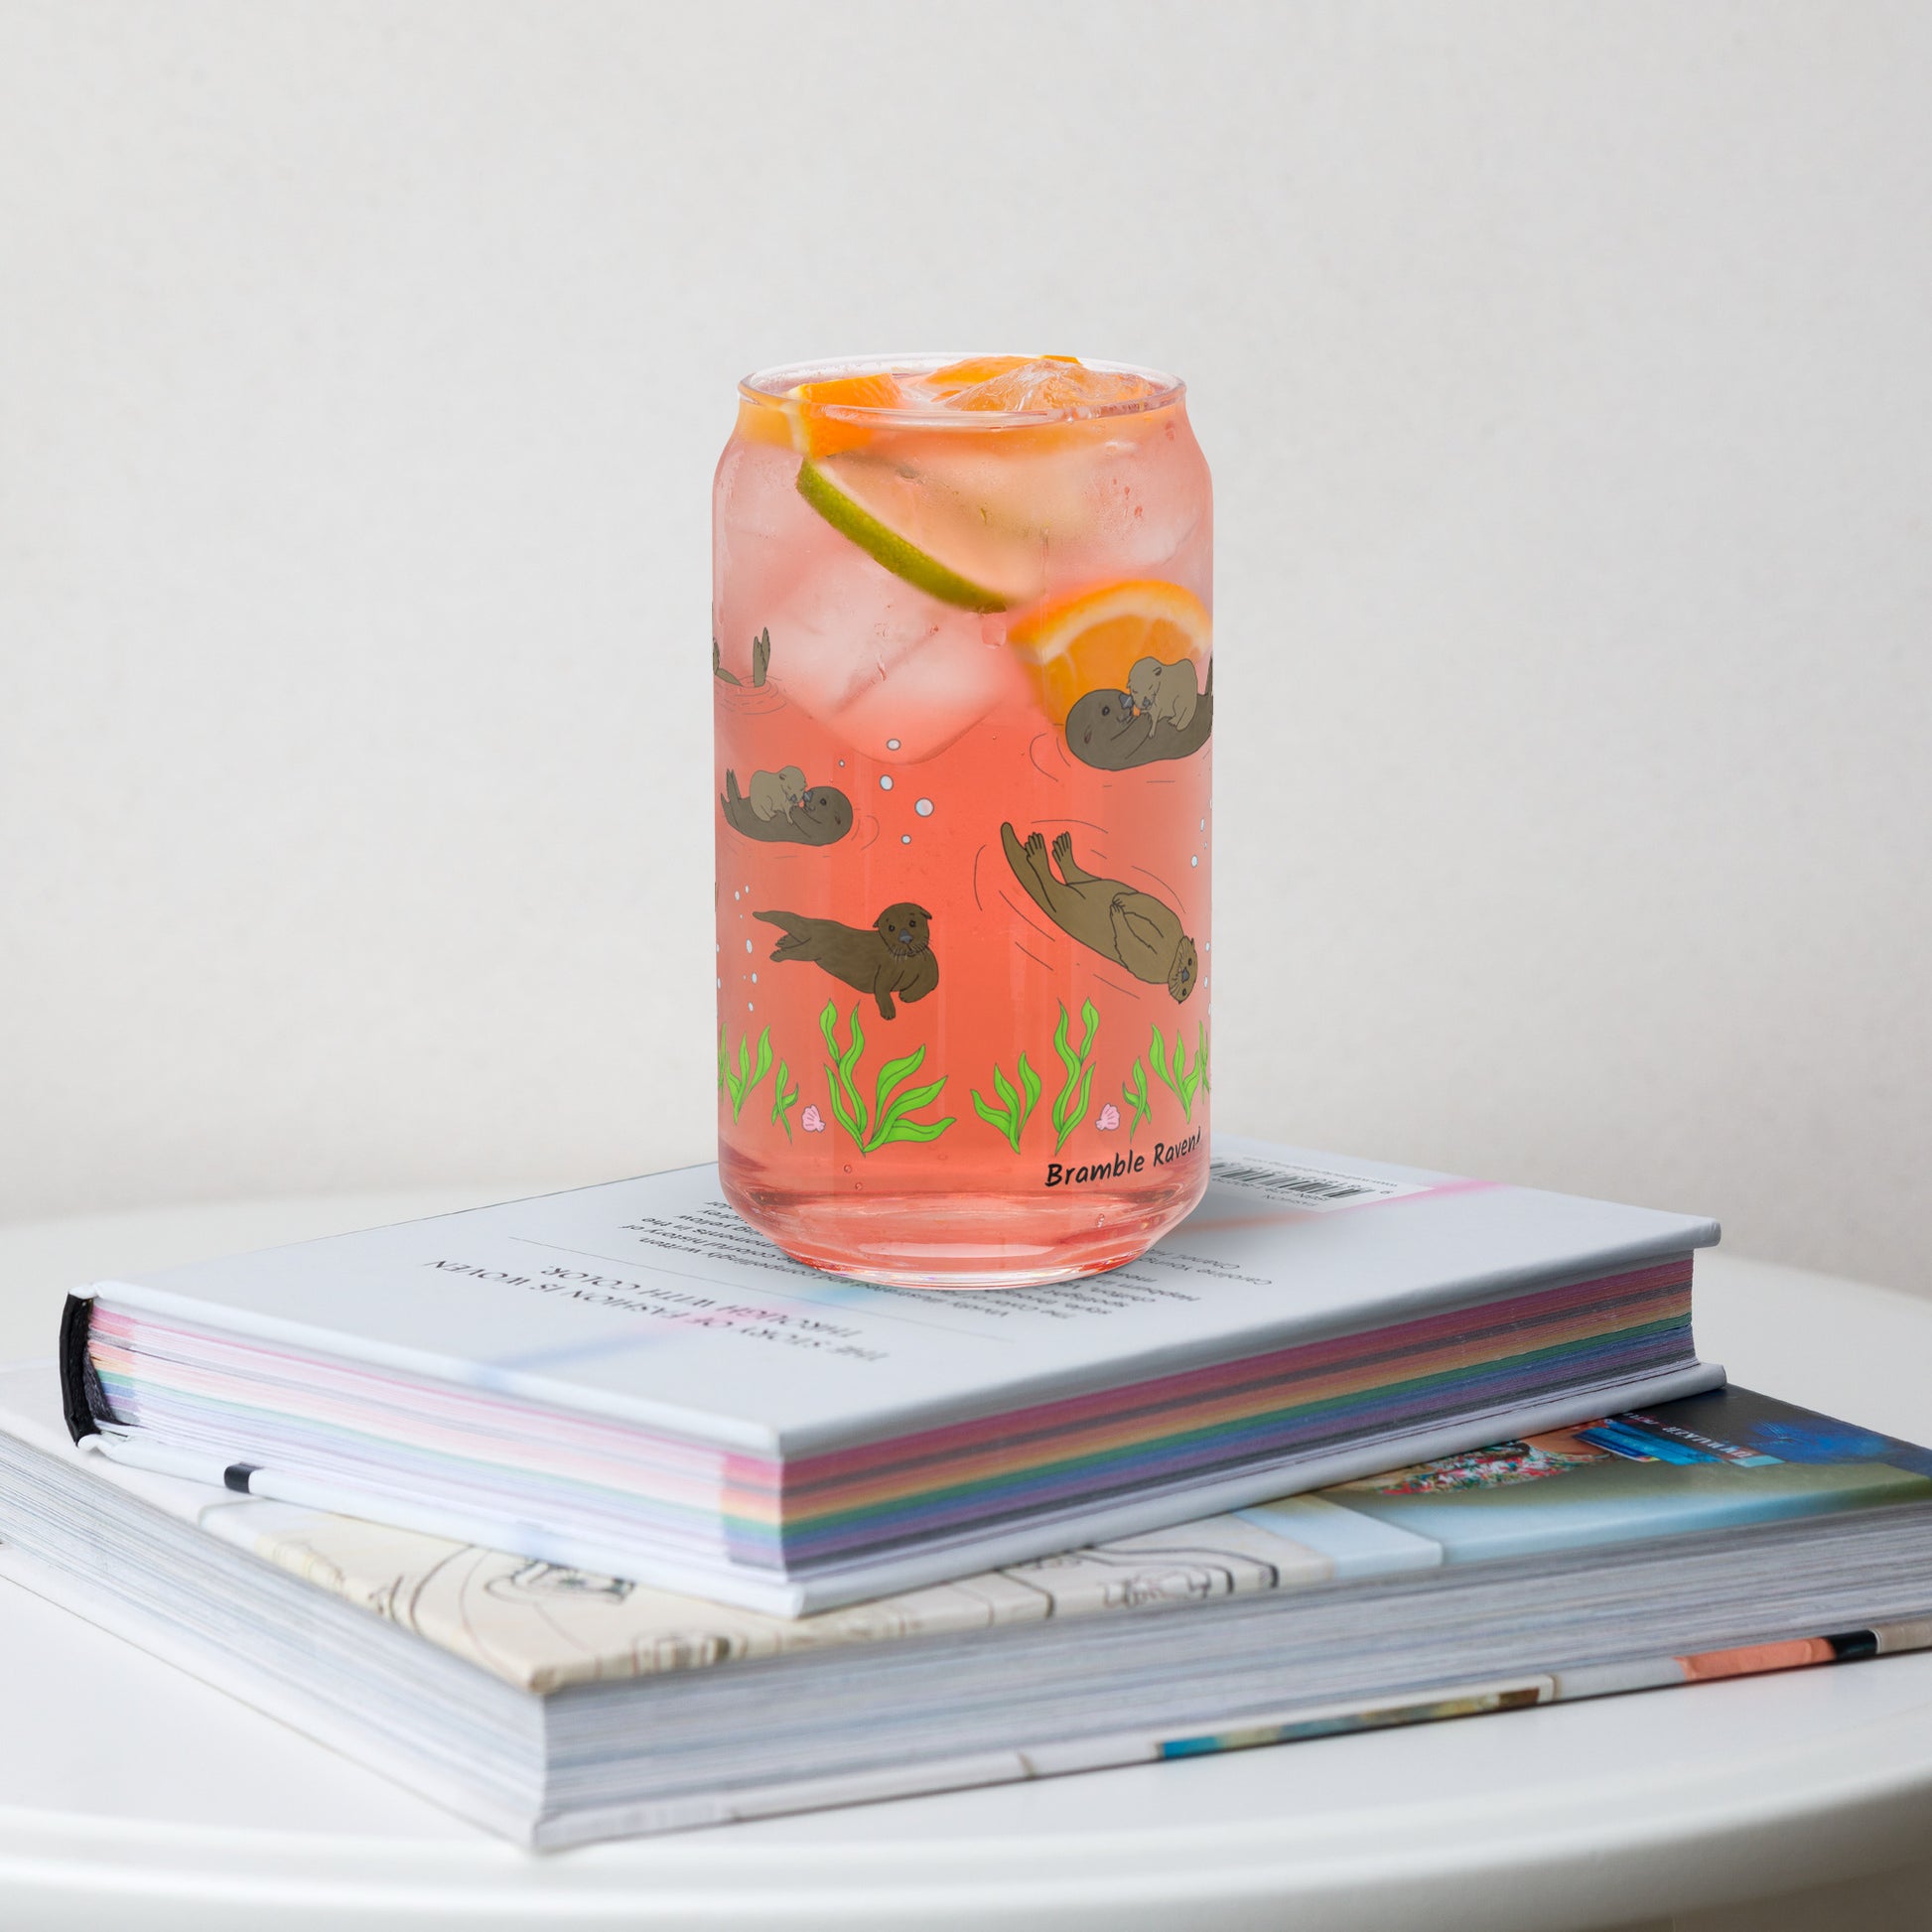 Can-shaped glass holds 16 fluid ounces. Has a design of sea otters swimming above the seaweed with bubble and shell accents. Shown filled with pink lemonade and citrus wedges, sitting on a stack of books.